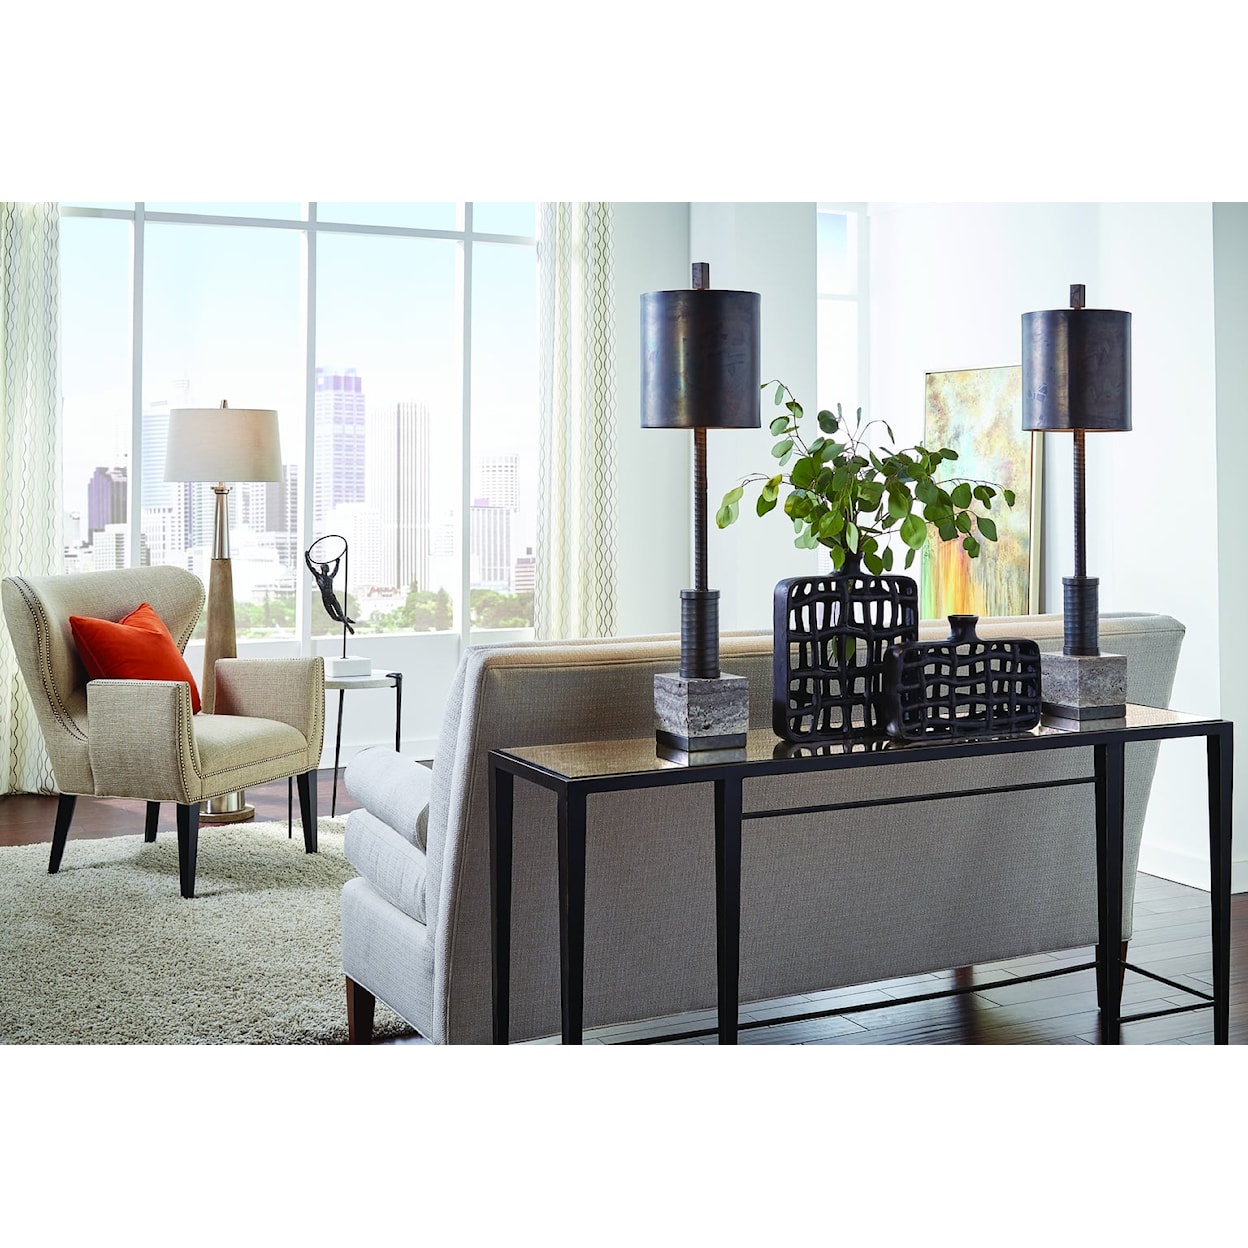 Wildwood Lamps Tables- Console CHELSEA CONSOLE TABLE- BRONZE